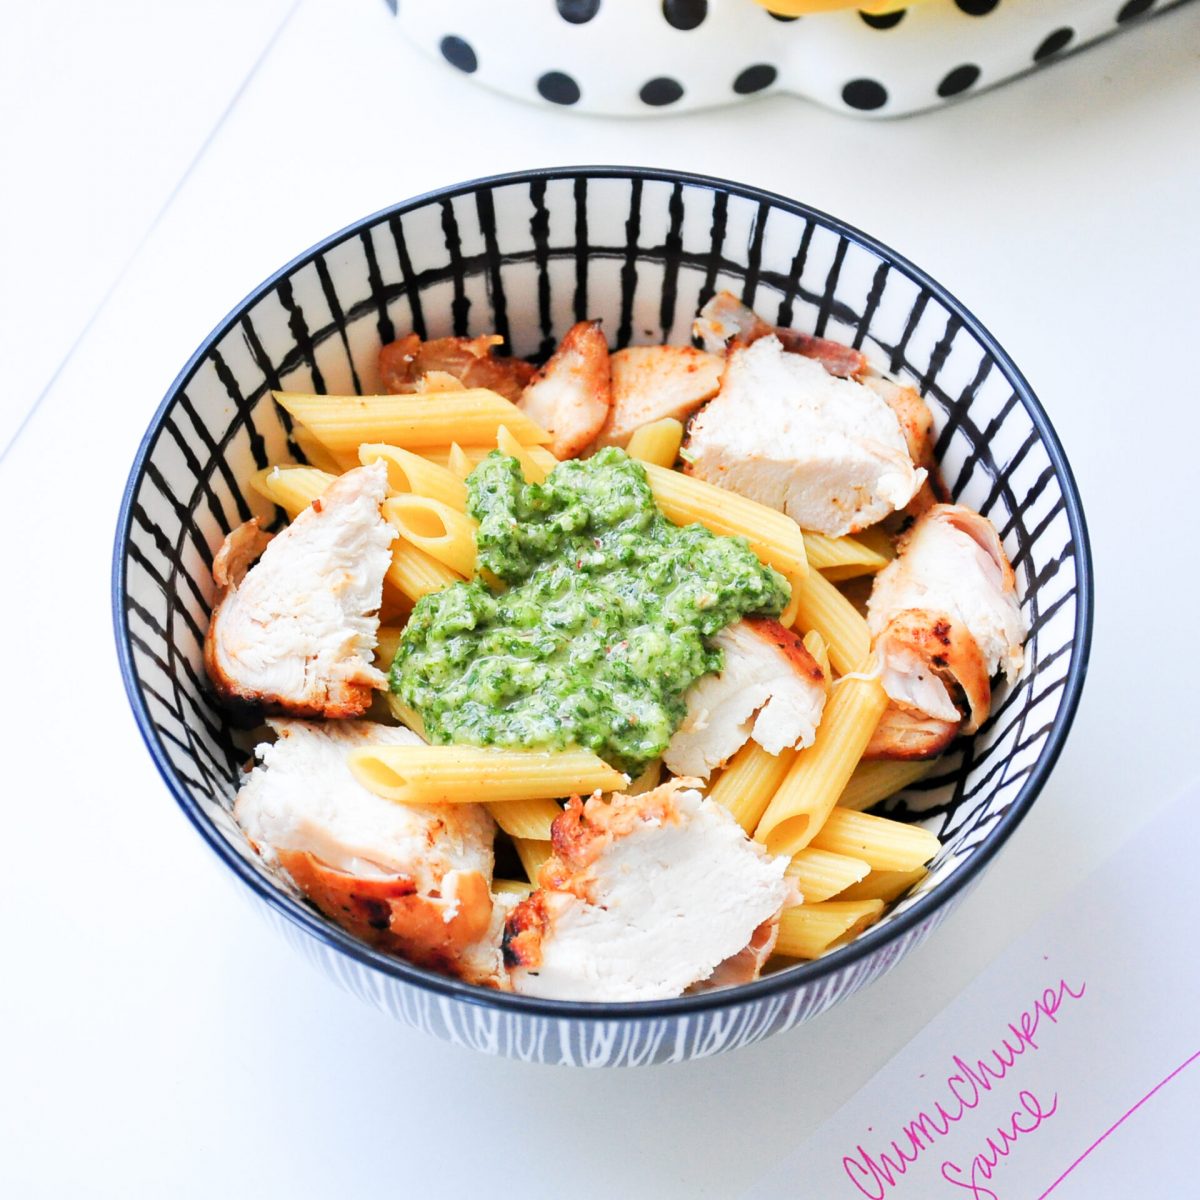 Not Your Normal Chimichurri Sauce